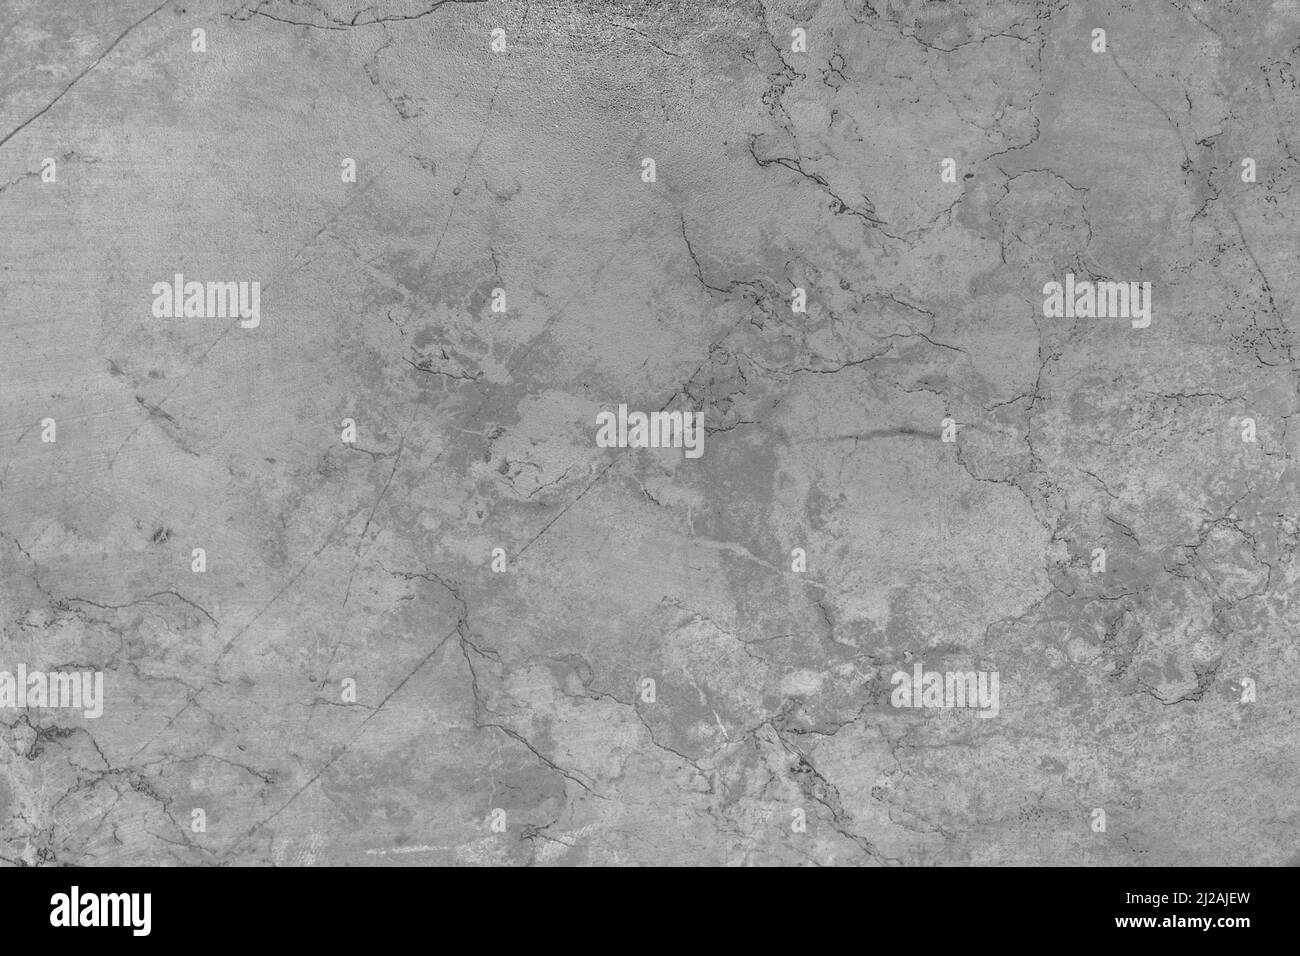 Marble Grey Floor Tile Texture Background Abstract Kitchen Pattern Gray Bathroom Design Grunge Ceramic Surface. Stock Photo